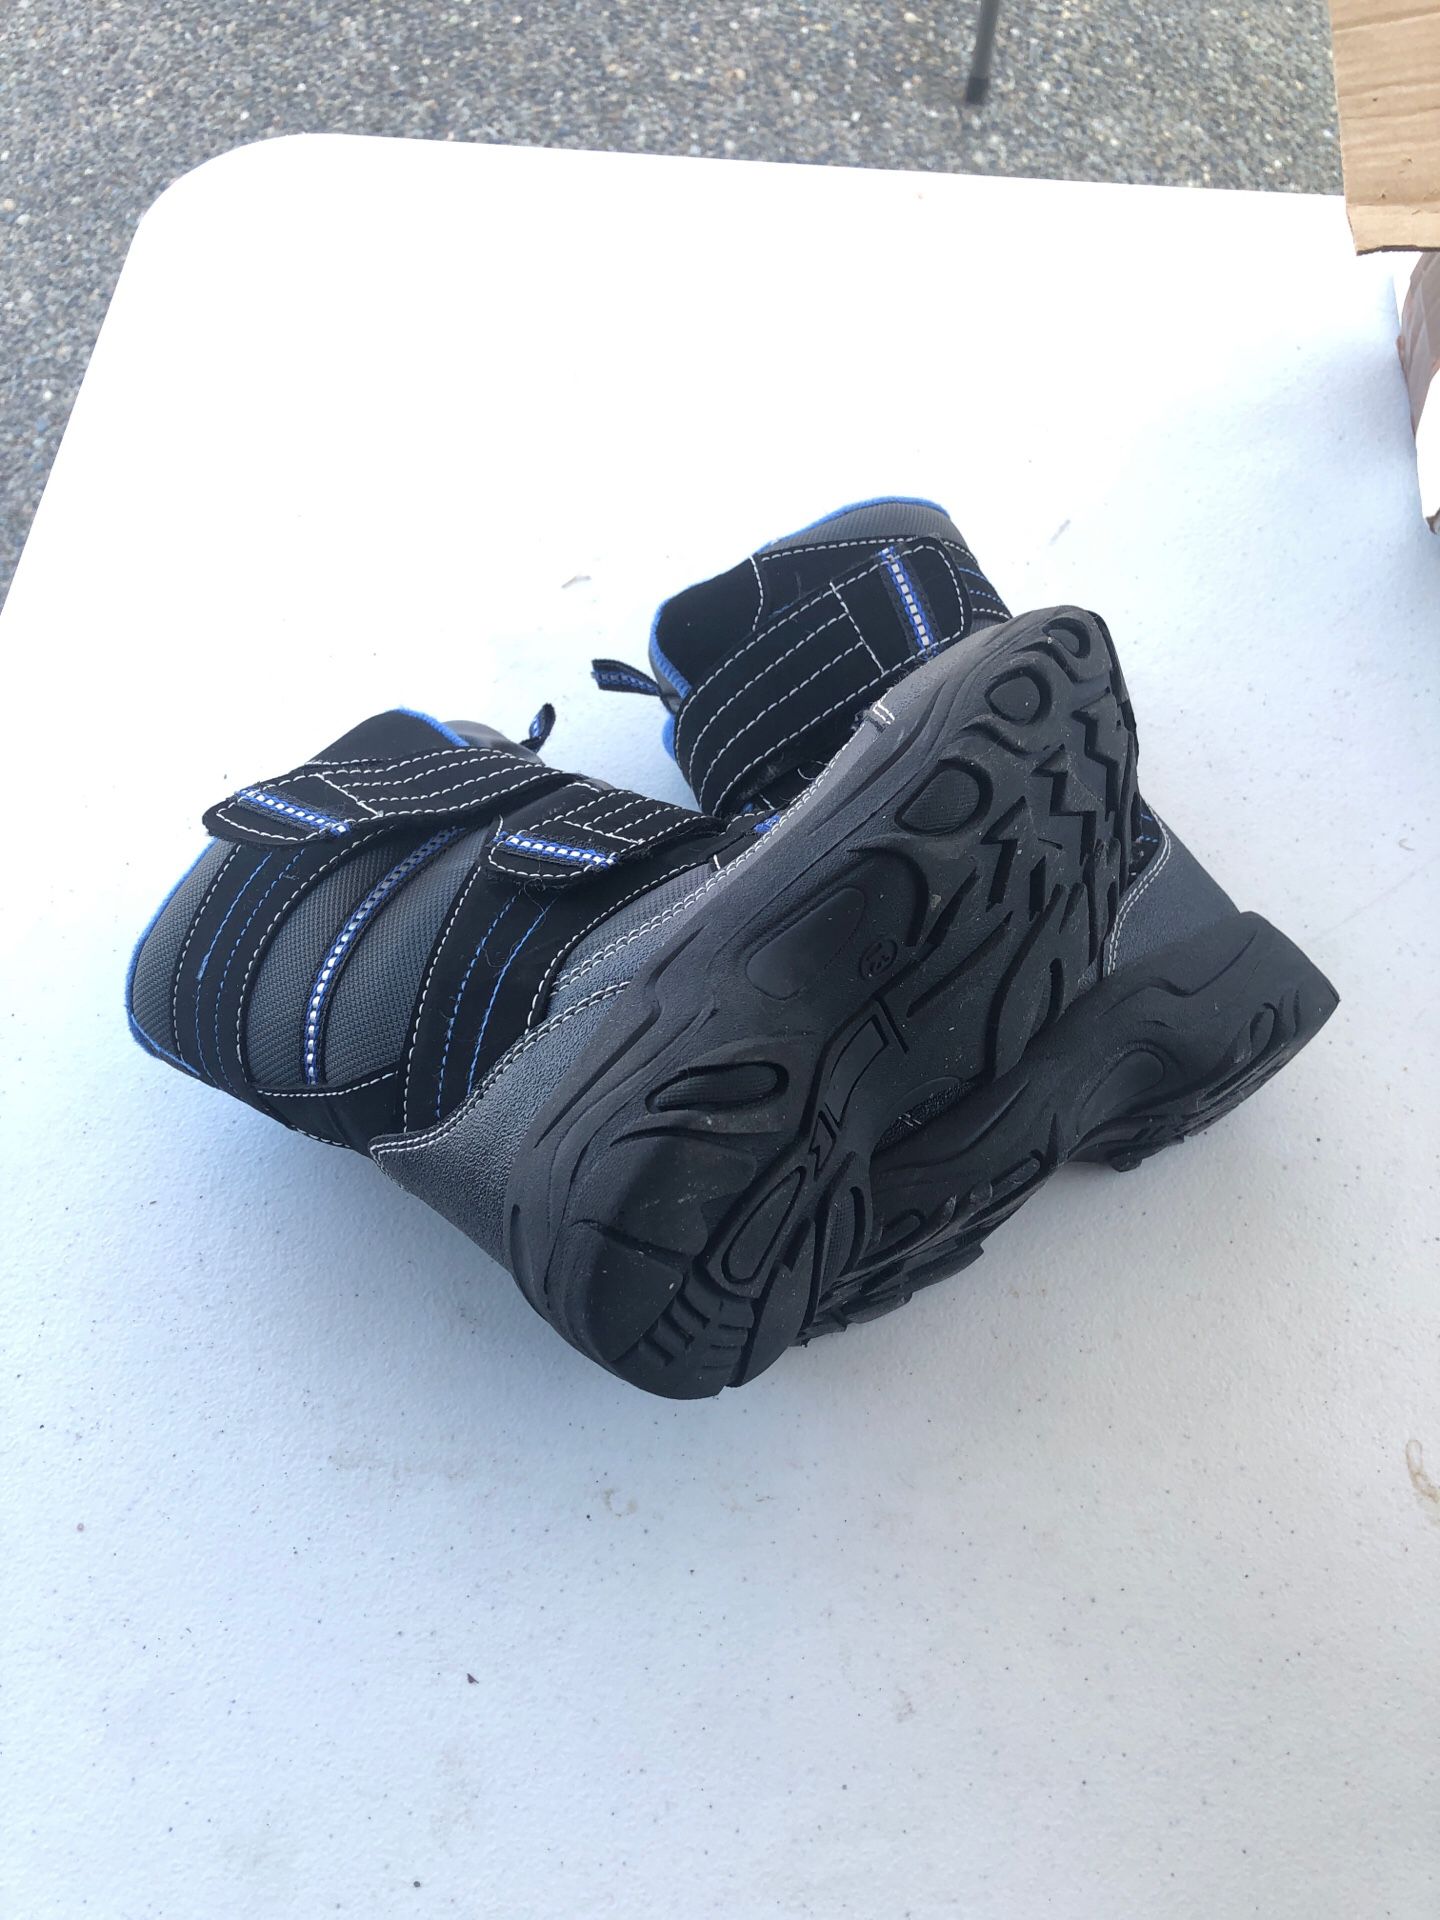 Kids snow boots size 13’s